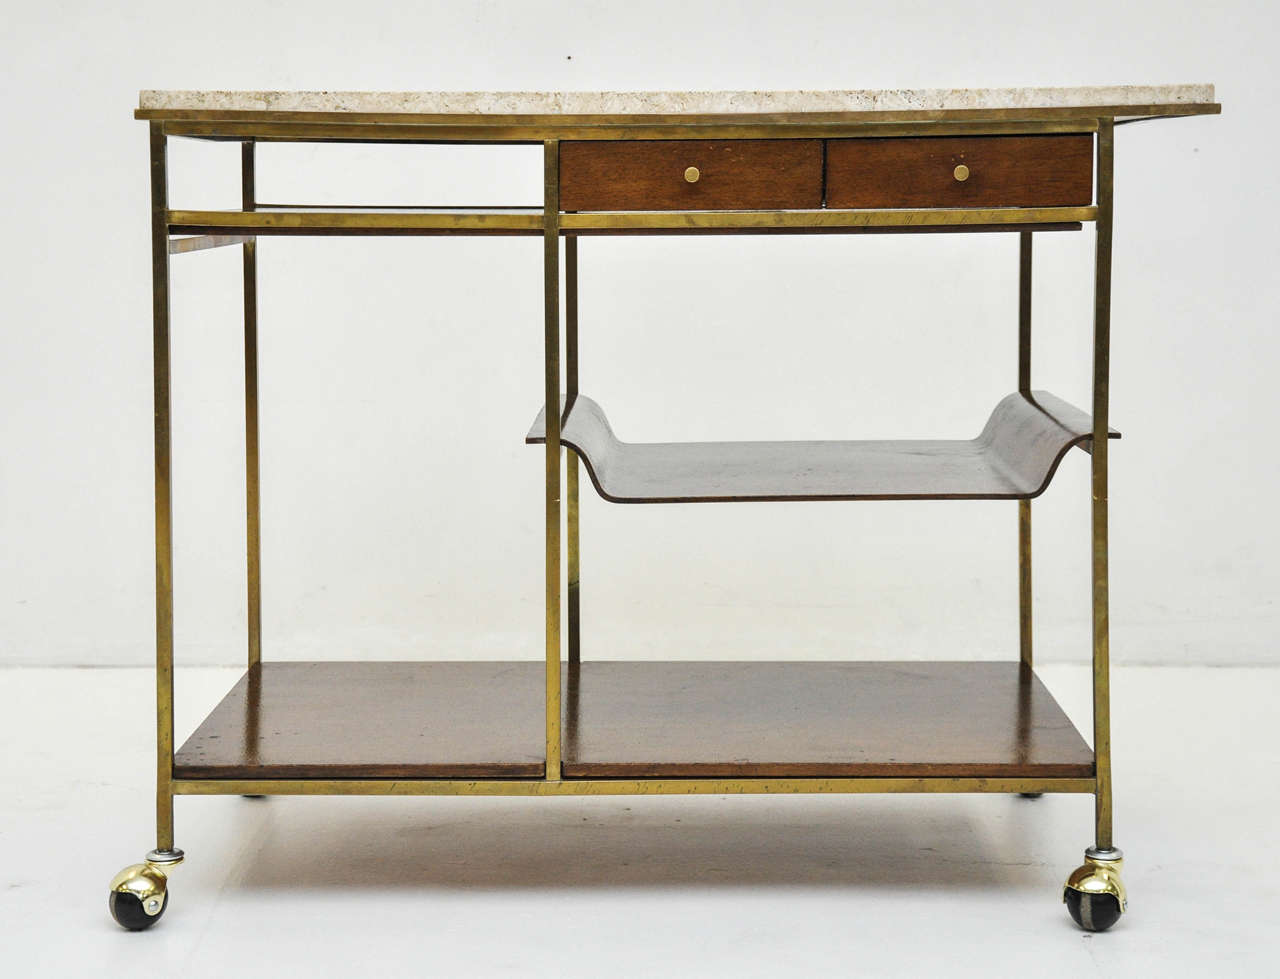 Bar serving cart by Paul McCobb. Original dark finish mahogany with brass frame and travertine top.